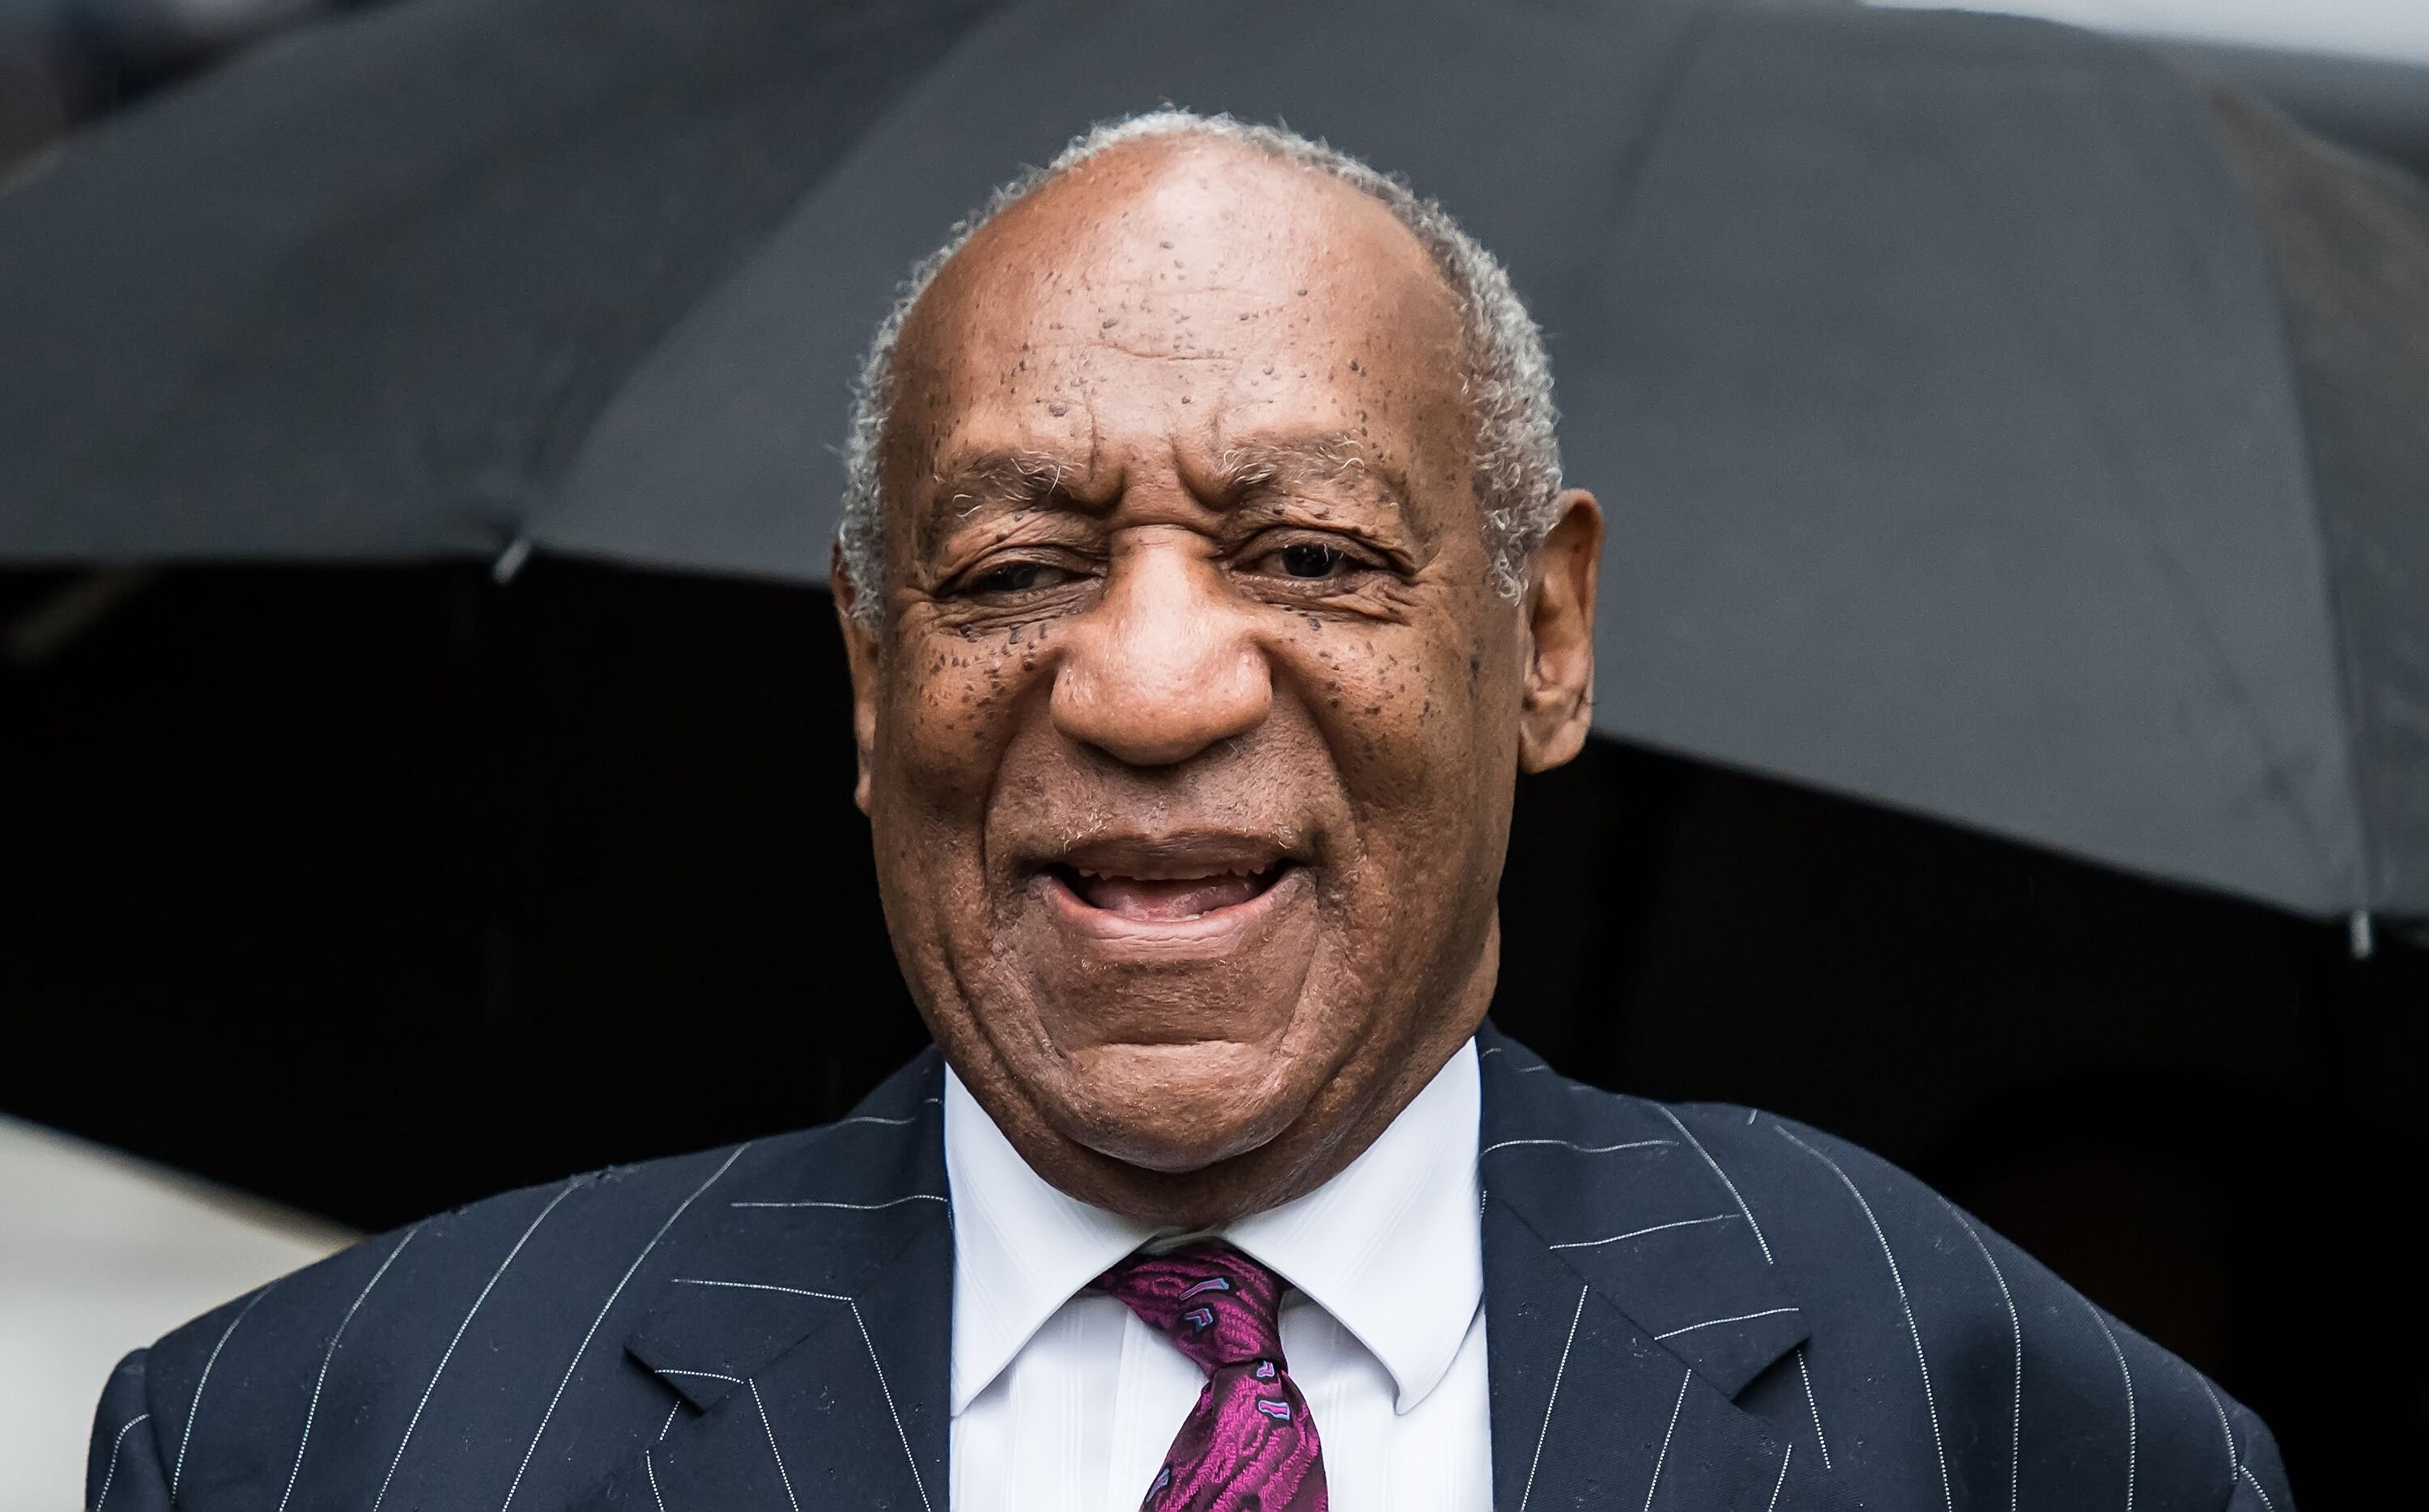 Bill Cosby exiting the courtroom during the Andrea Constand trial/ Source: Getty Images/ Getty Images